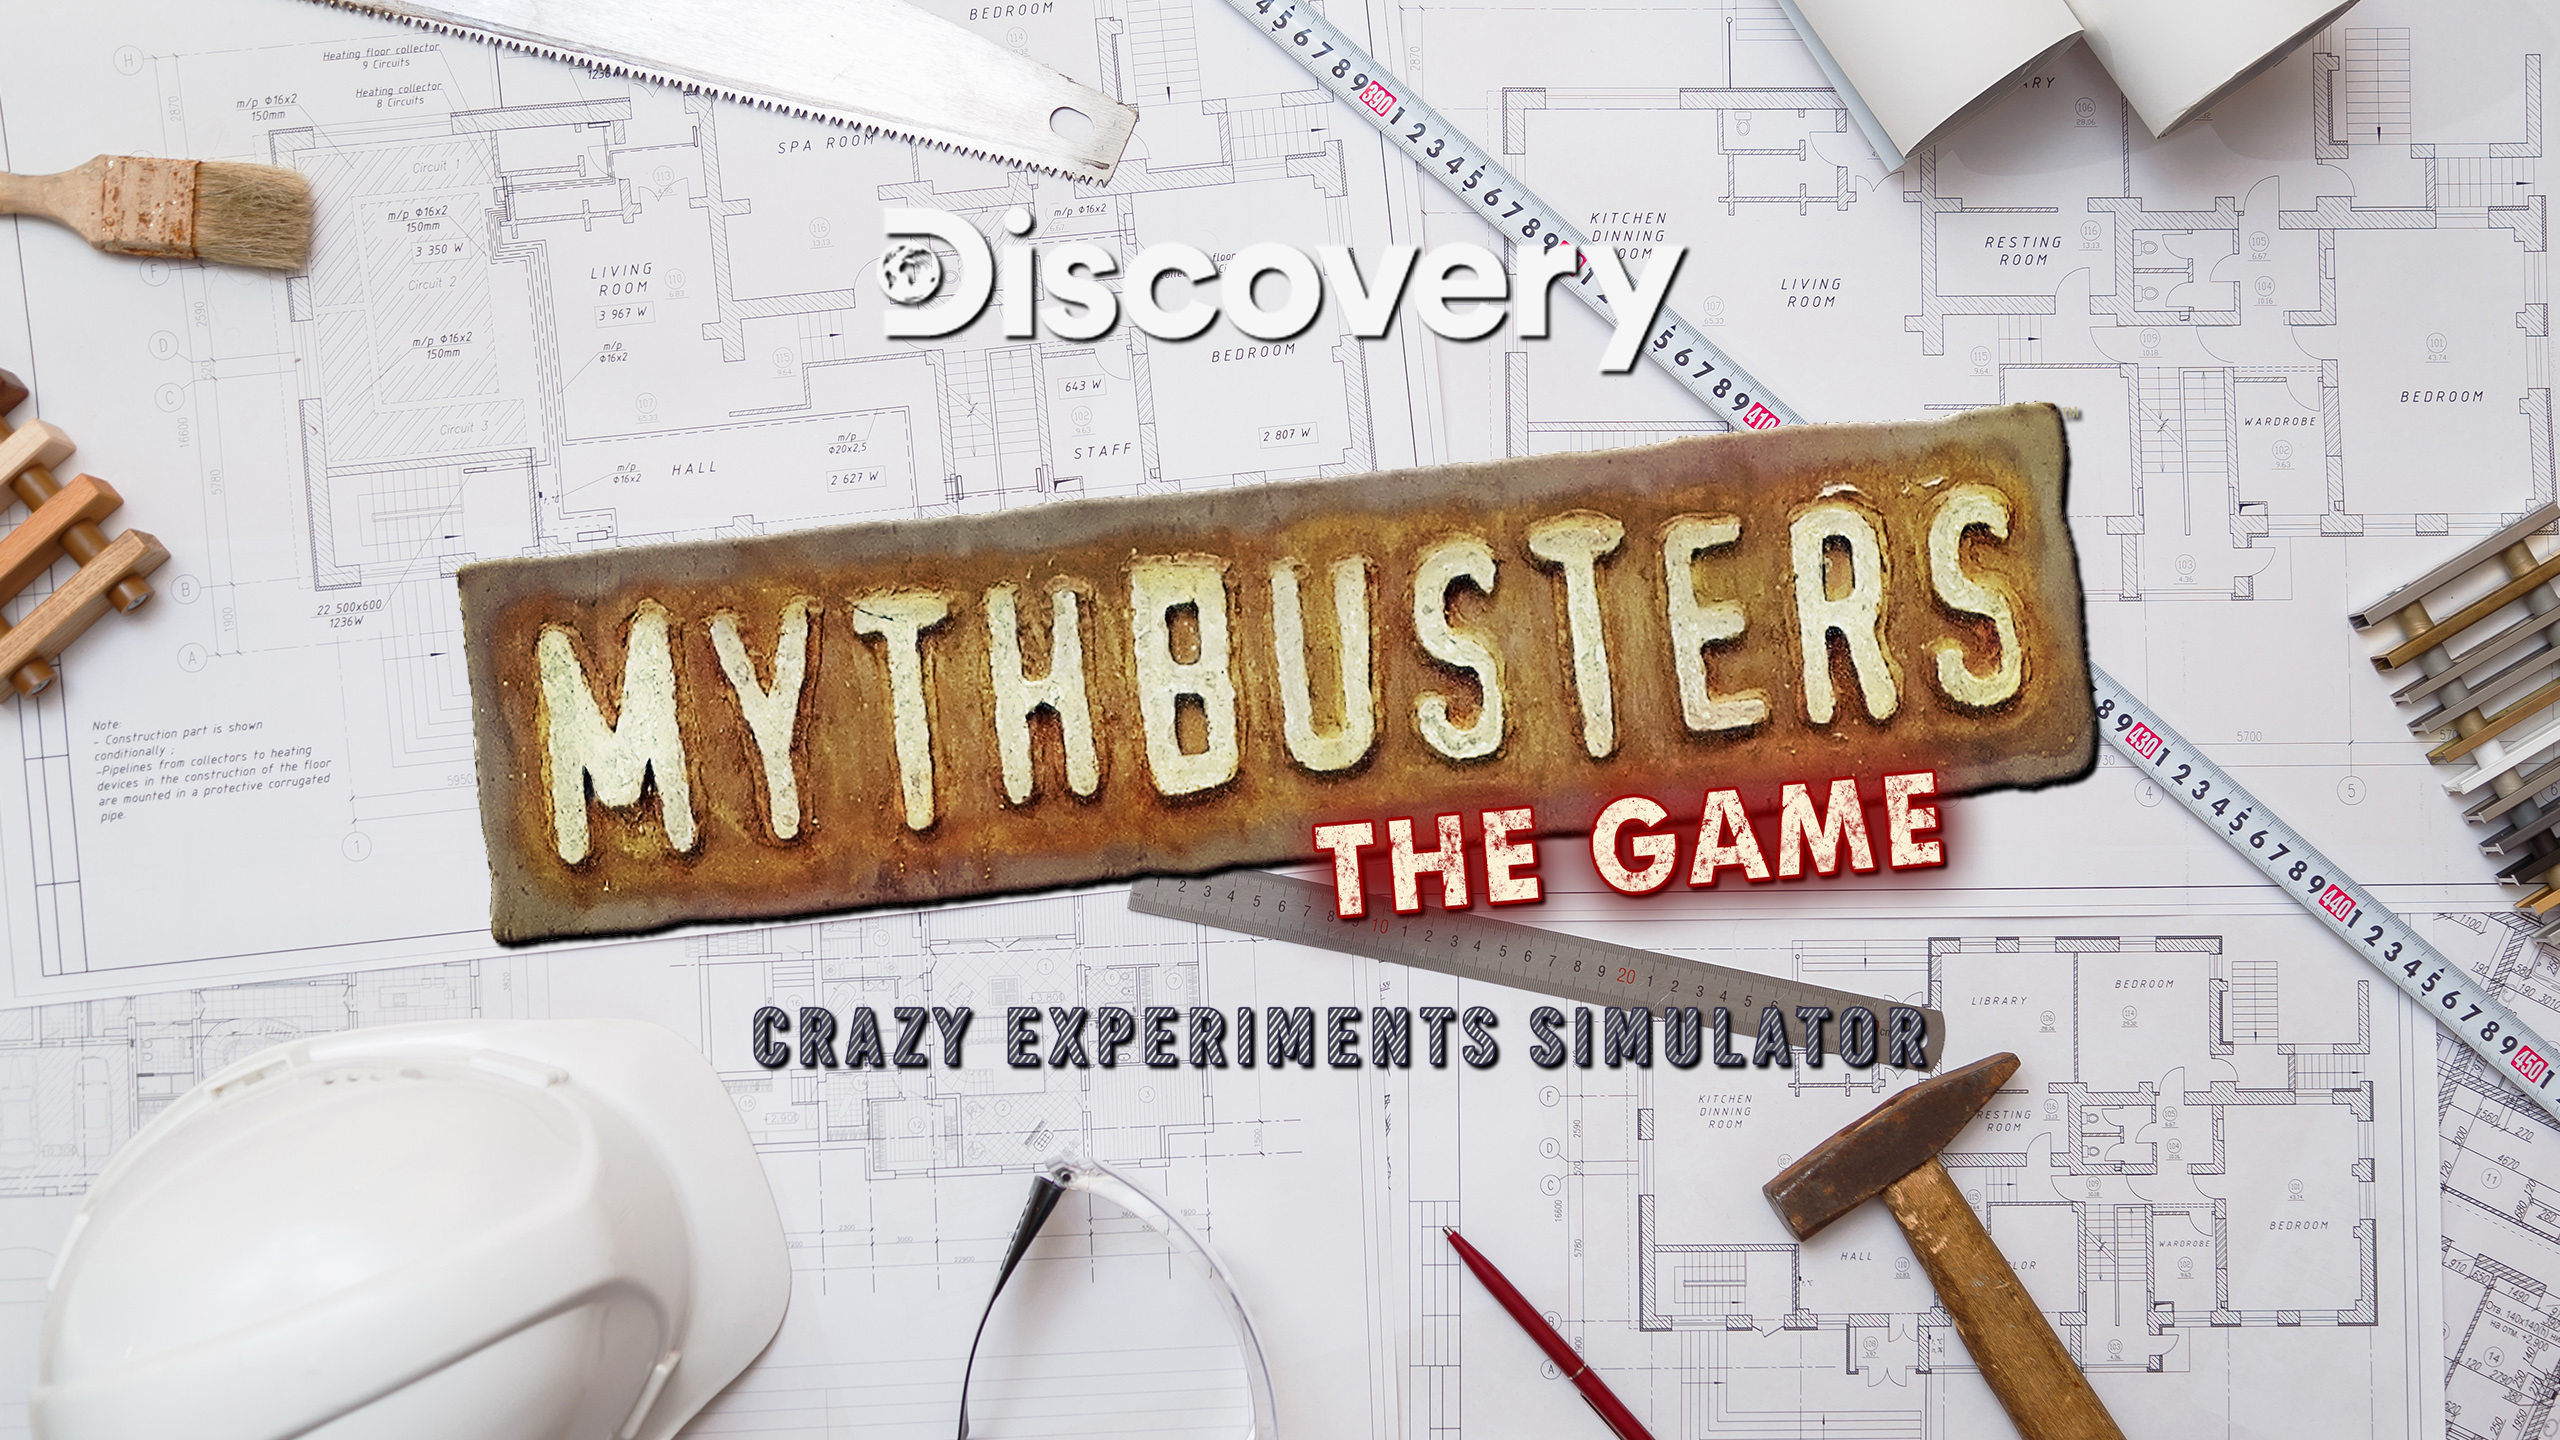 MythBusters The Game